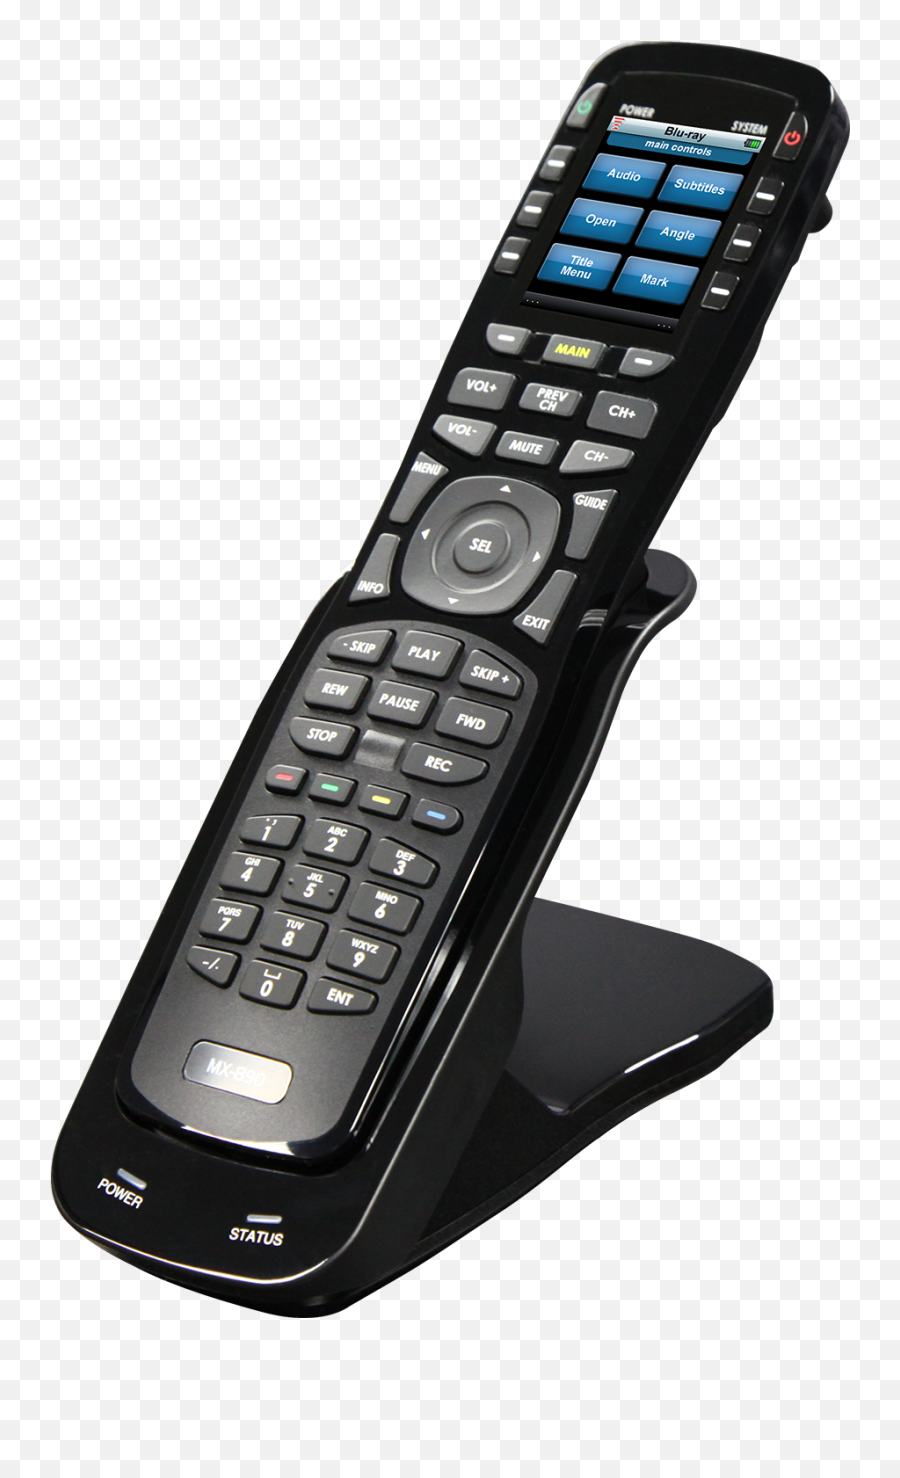 Universal Remote Control - Universal Remote Control Mx 890 Png,Is There A Icon On Mc890 For Netflix